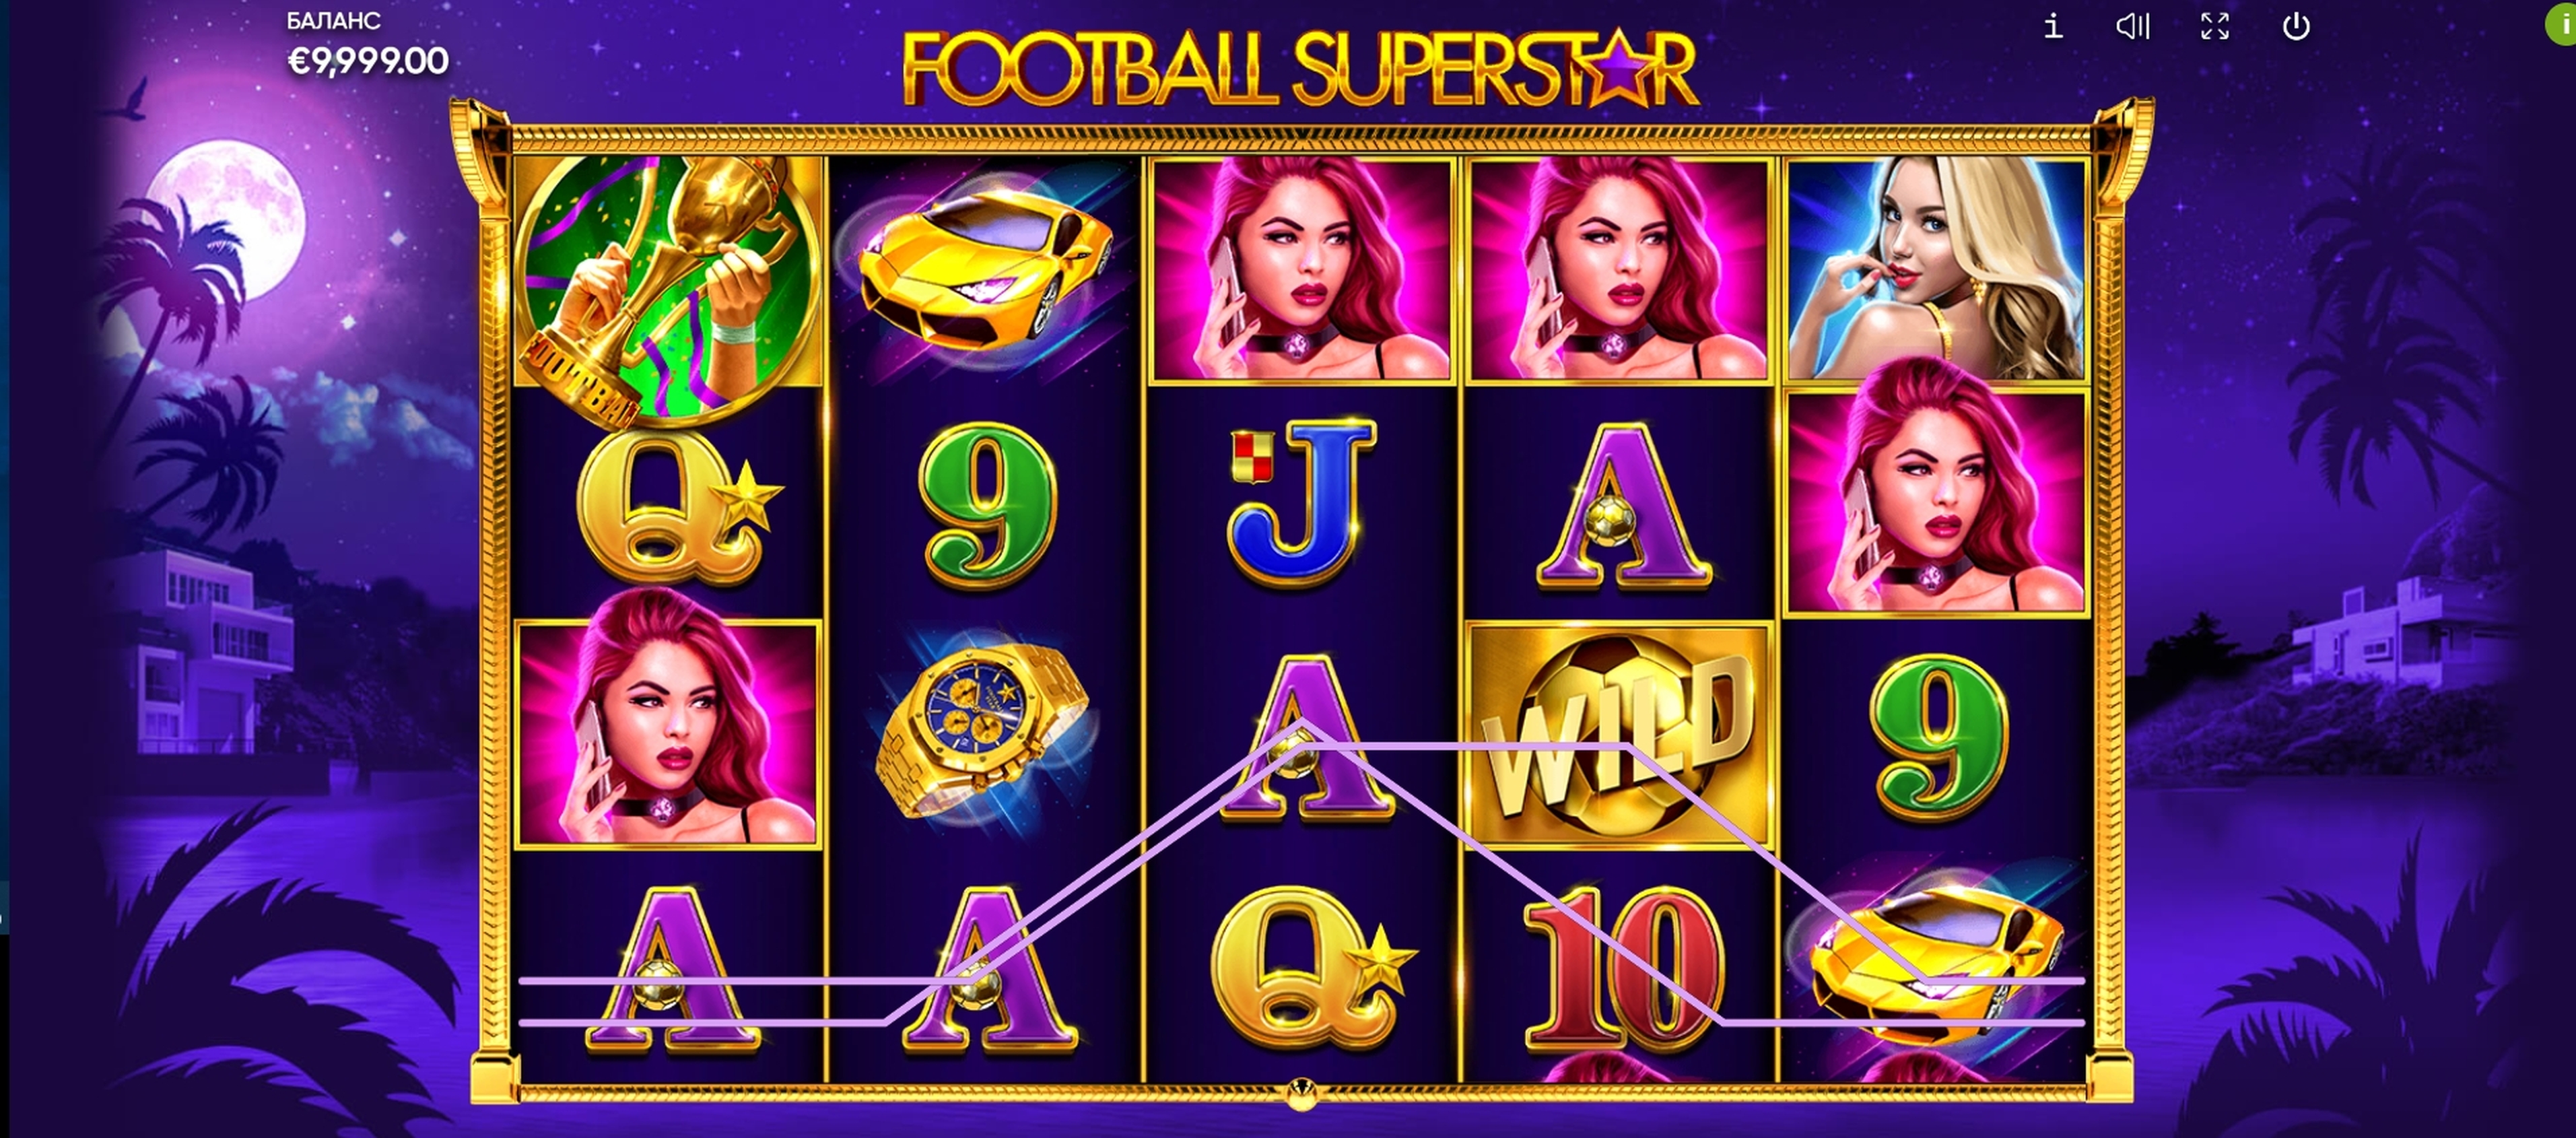 Win Money in Football Superstar Free Slot Game by Endorphina